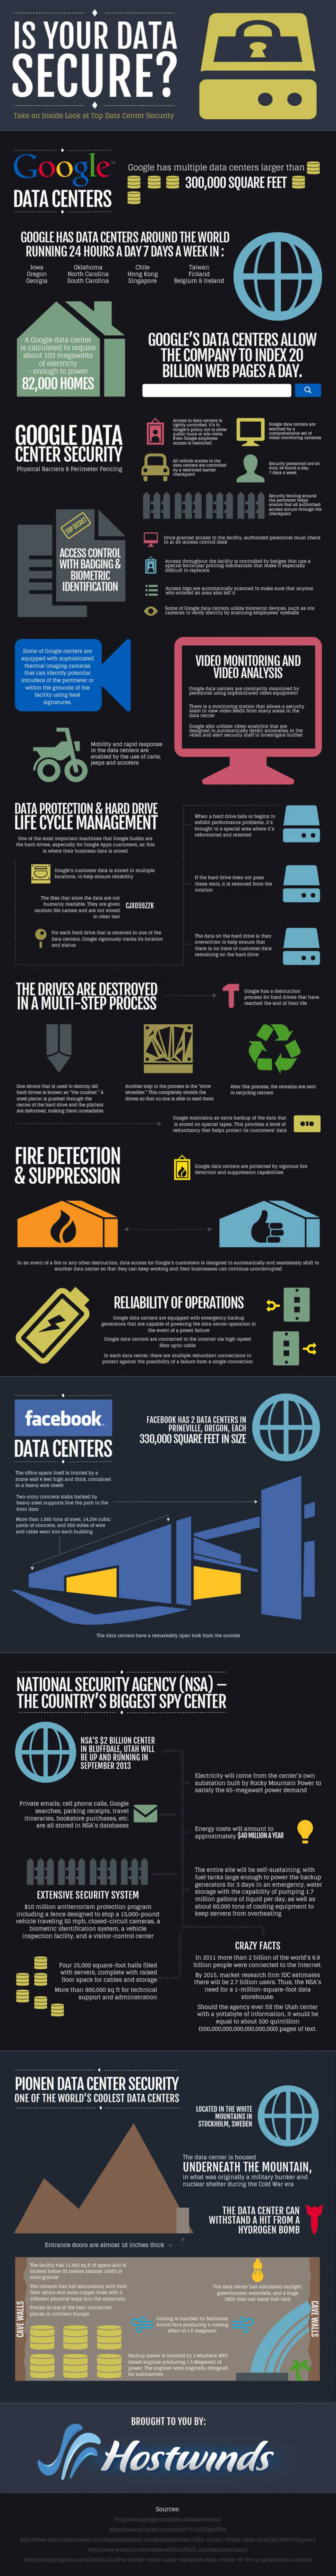 How Secure Is Your Personal Data in Light of PRISM? Infographic